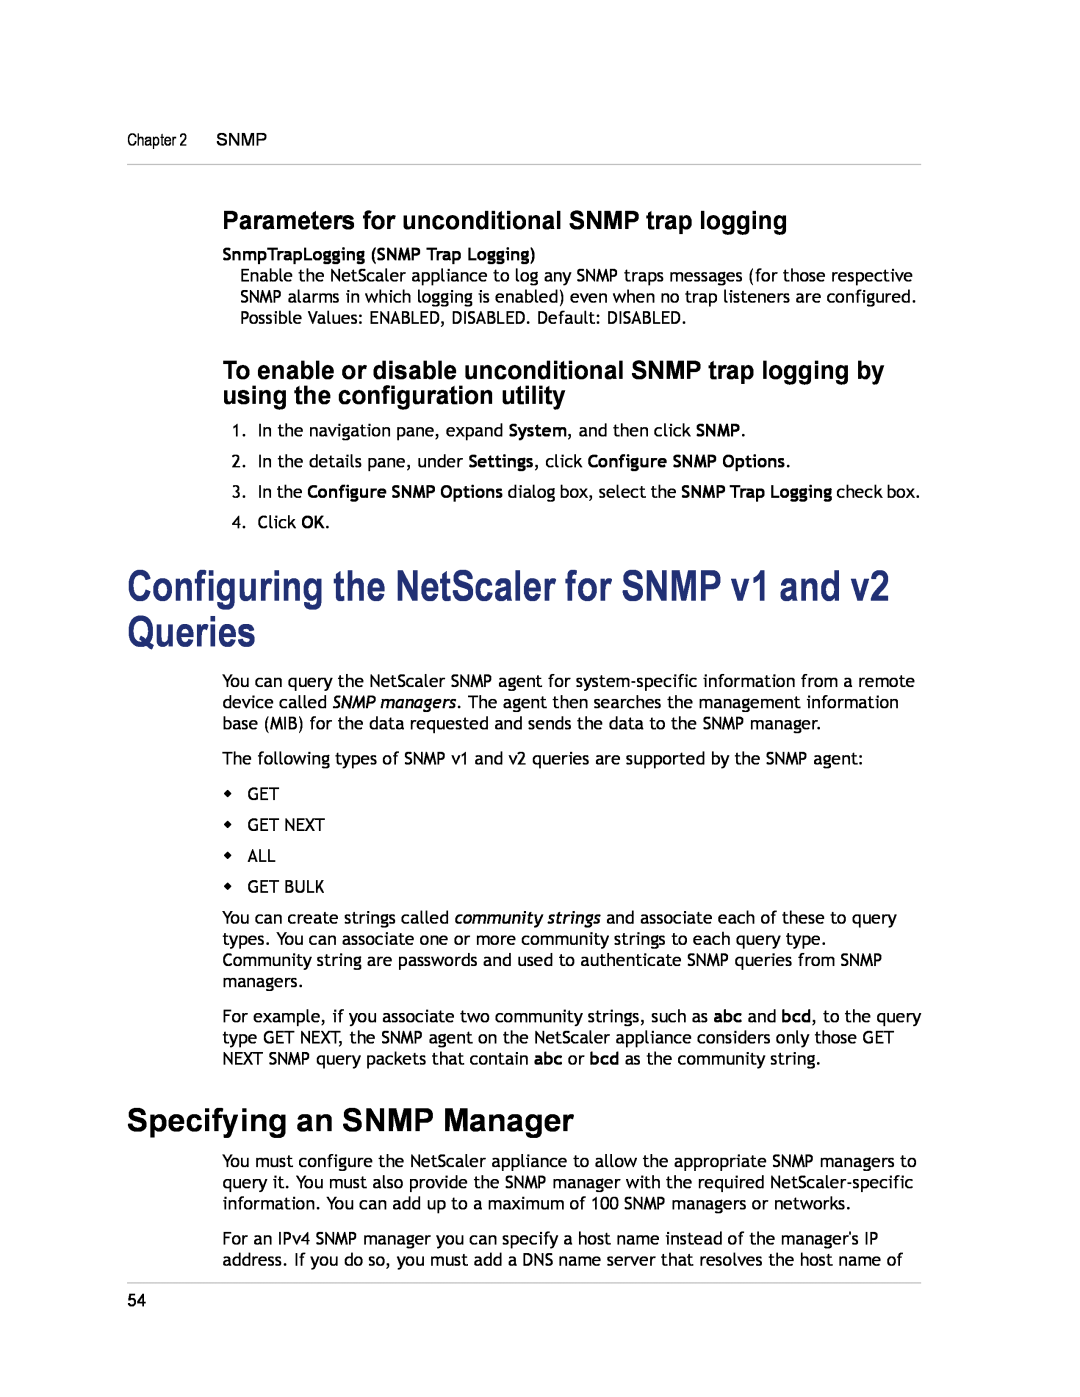 Citrix Systems CITRIX NETSCALER 9.3 manual Configuring the NetScaler for SNMP v1 and v2 Queries, Specifying an SNMP Manager 